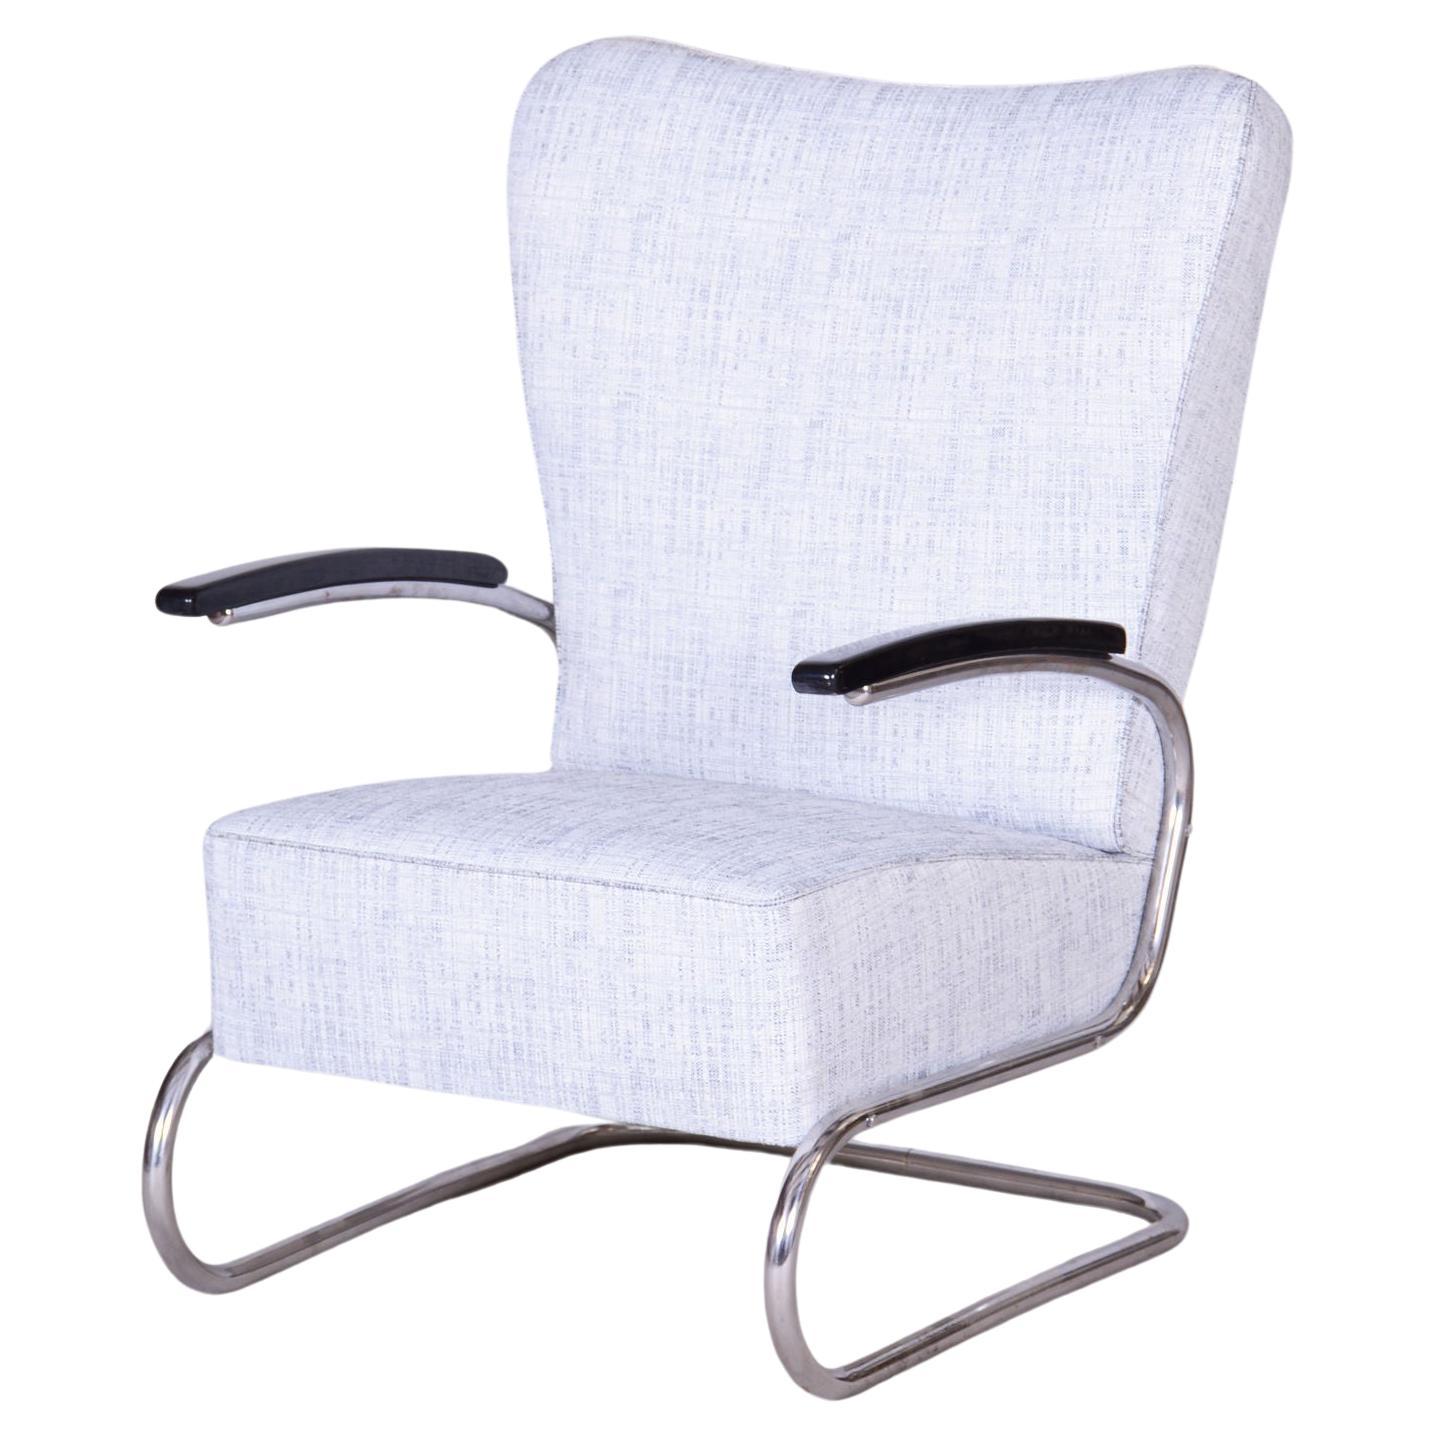 Restored Bauhaus Armchair by Kovona, Chrom-Plated Steel, Germany, 1930s For Sale